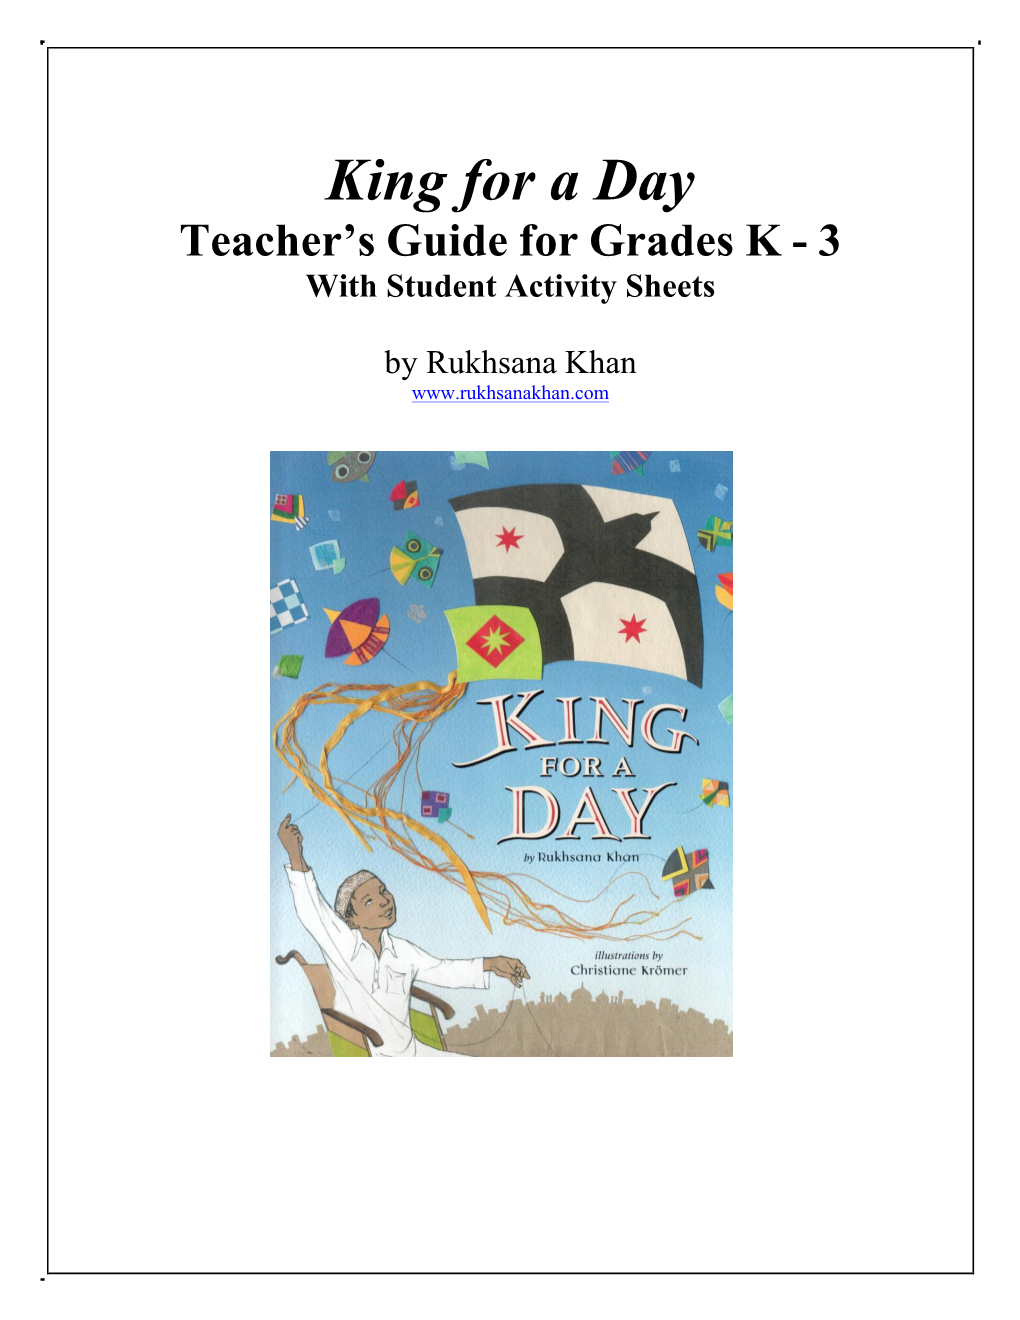 King for a Day Teacher's Guide